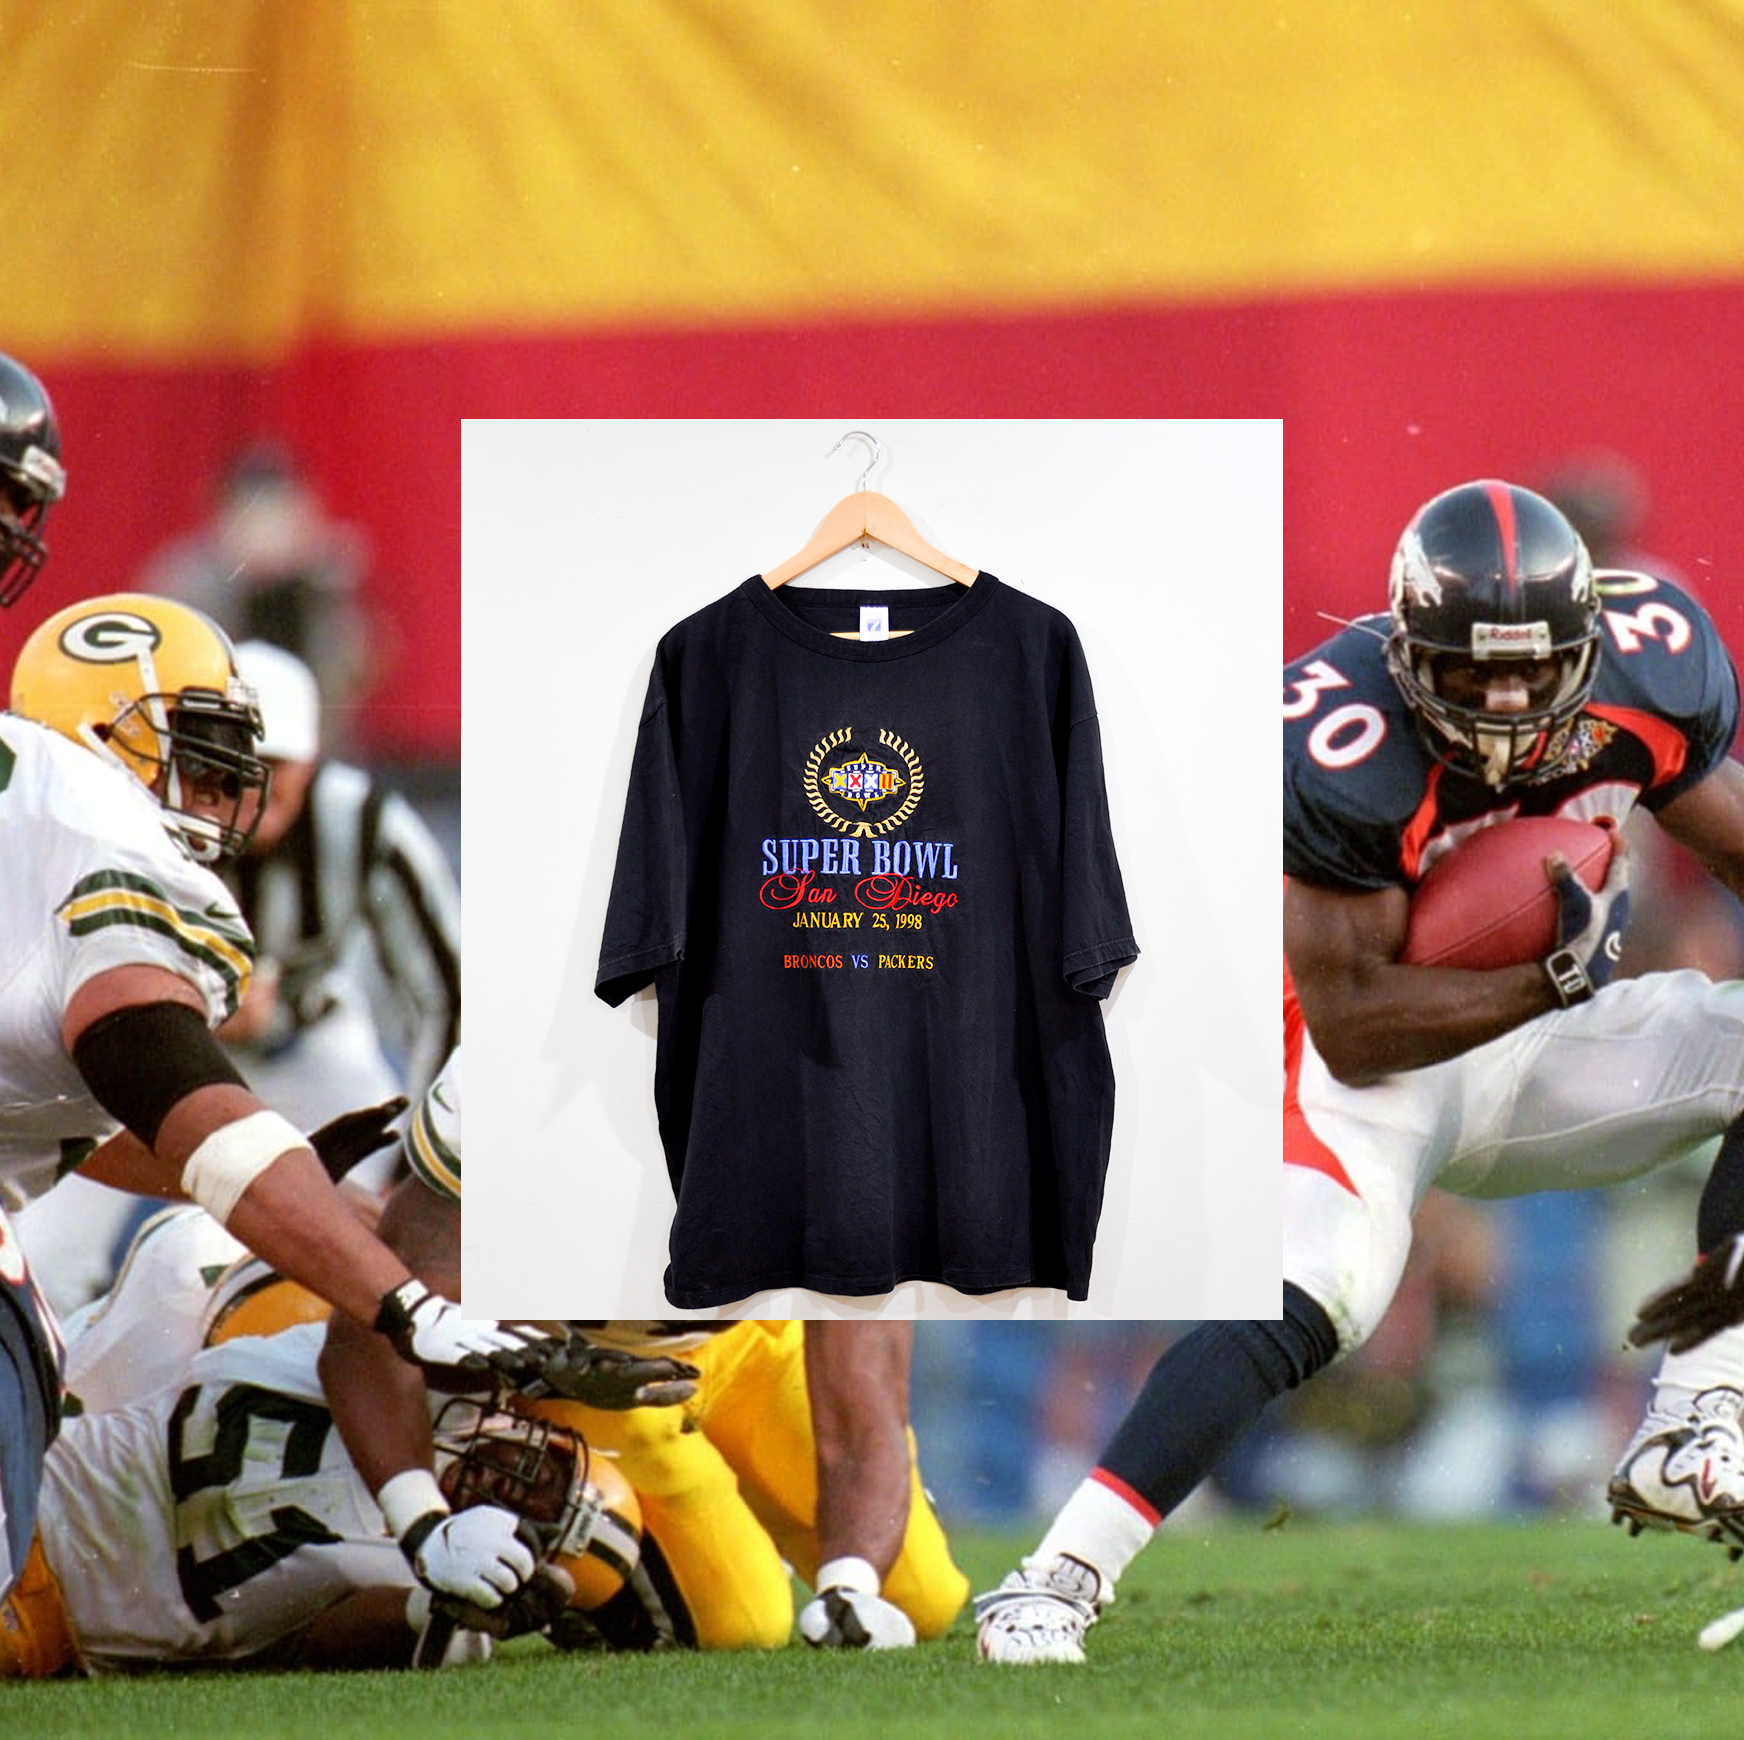 SUPER BOWL XXXII “Broncos vs Packers” EMBROIDERED TEE